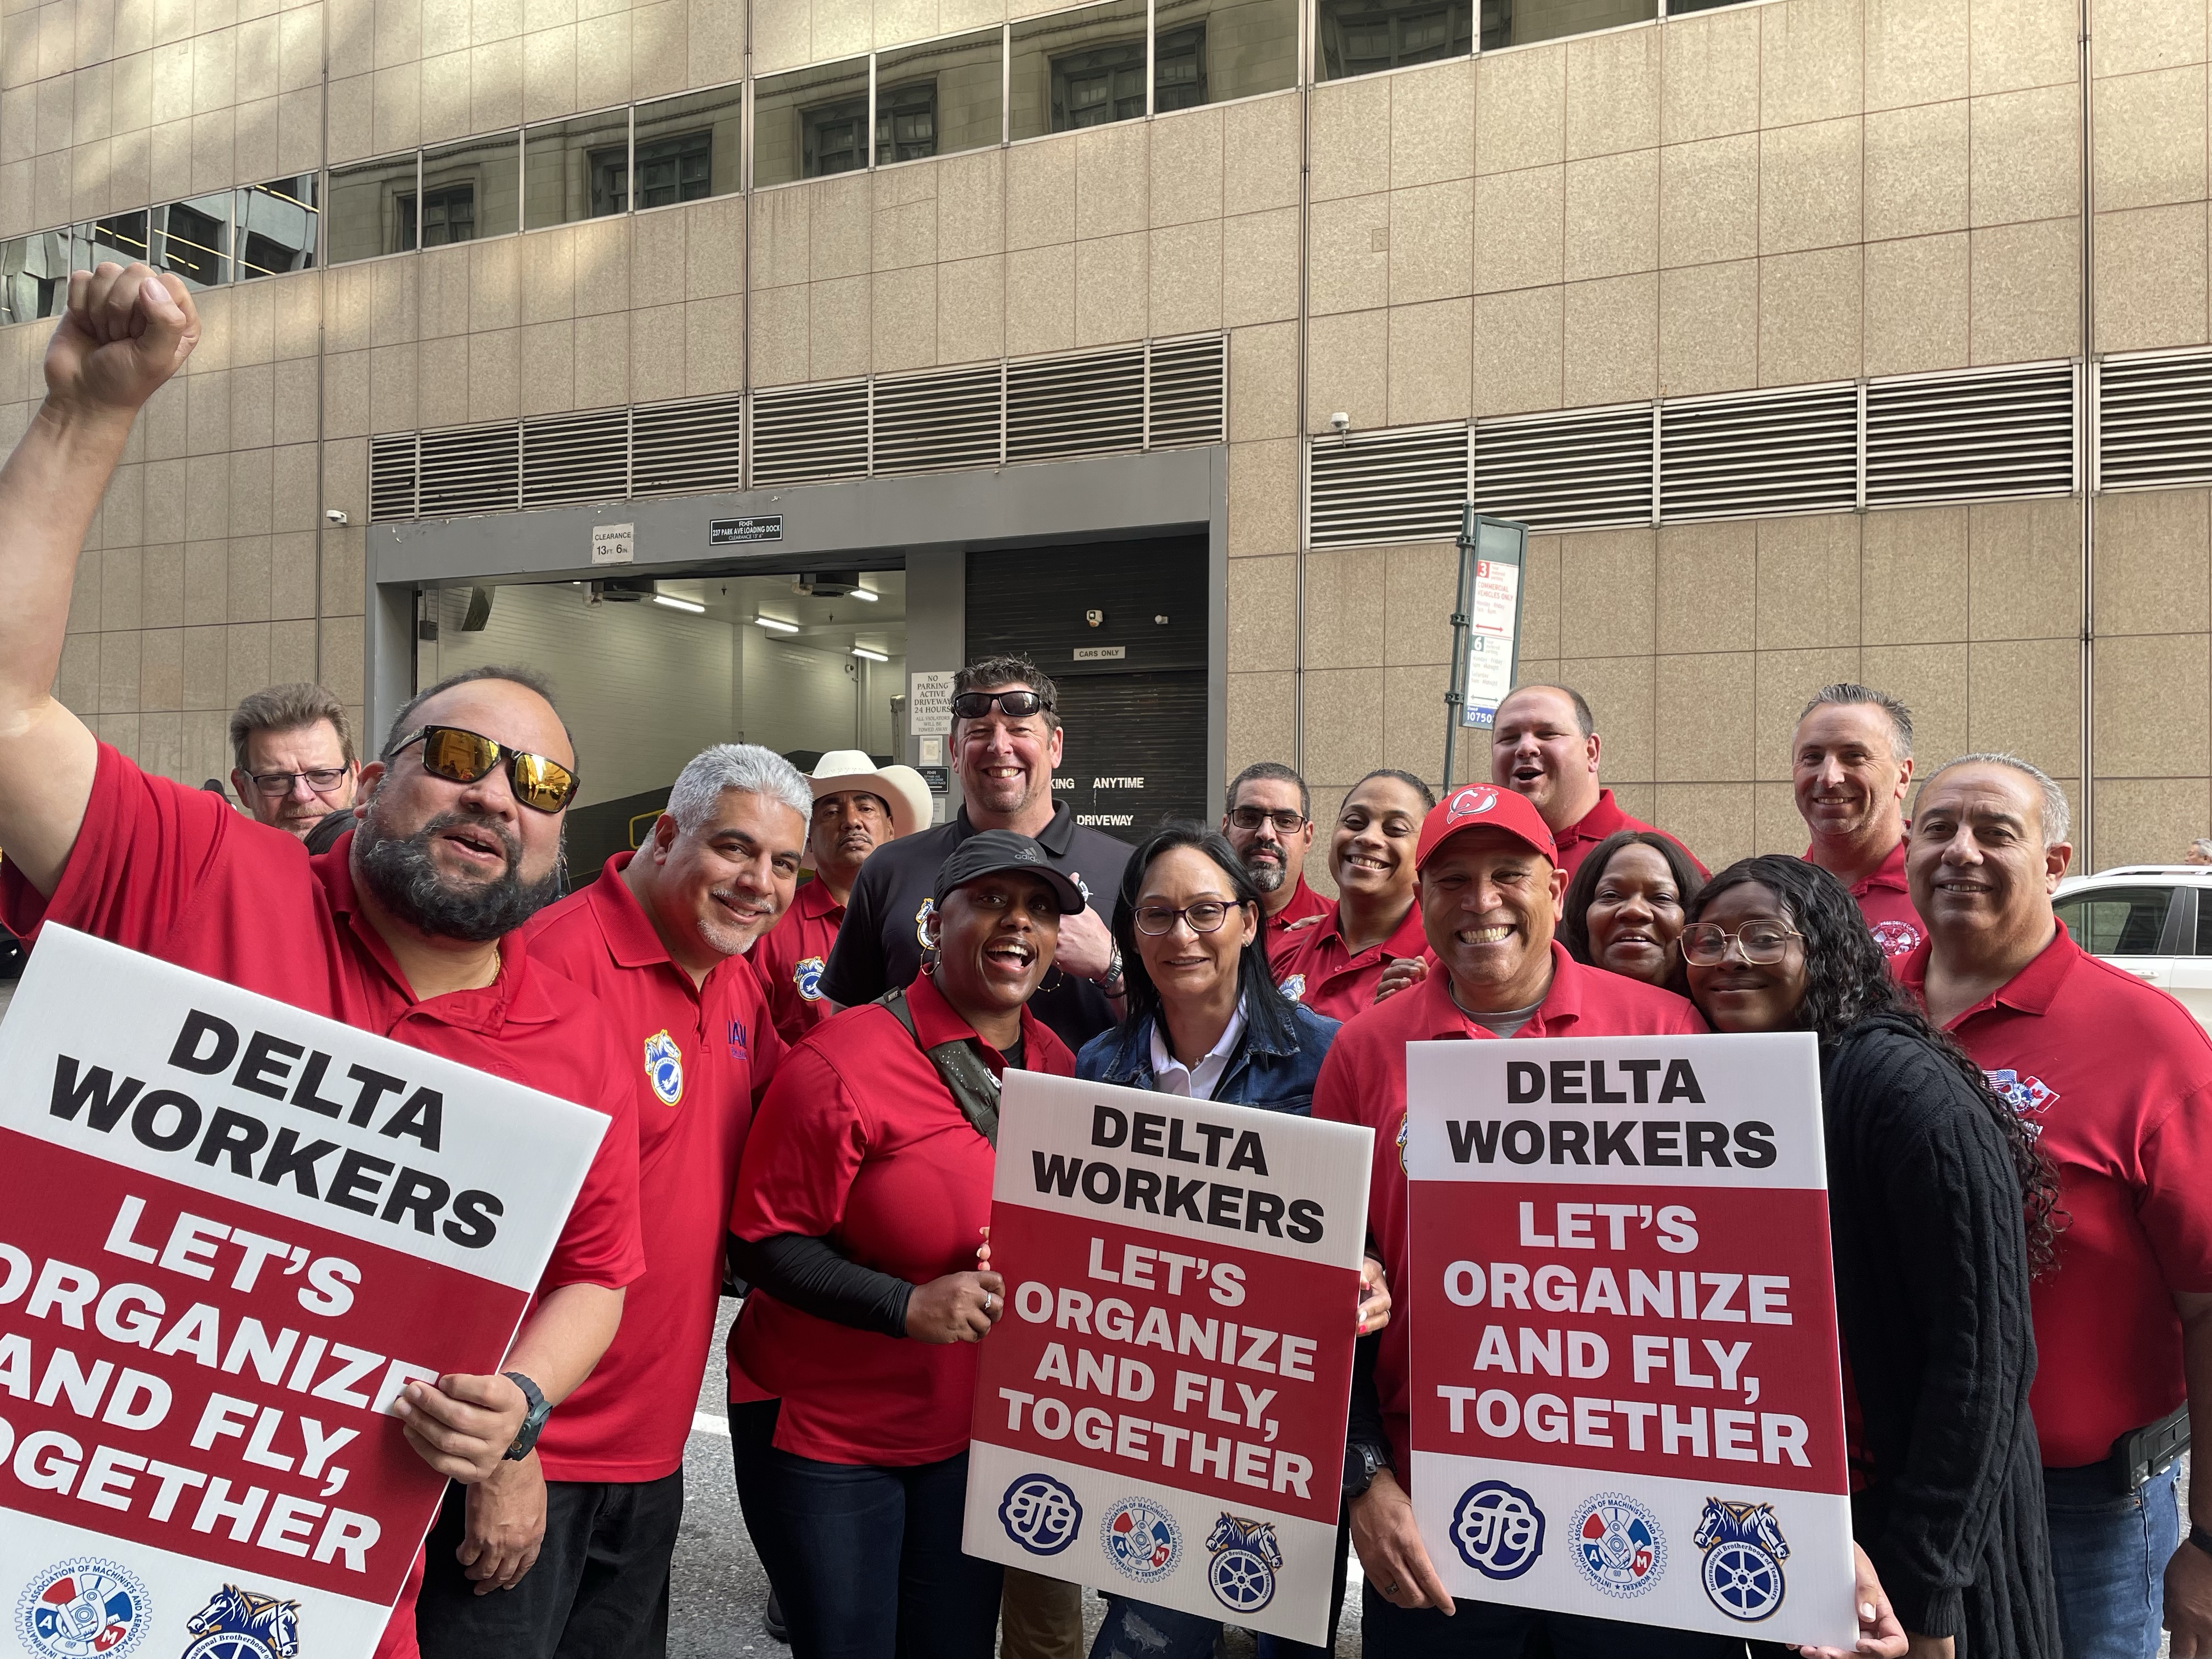 DELTA Workers, Organize & FIGHT!